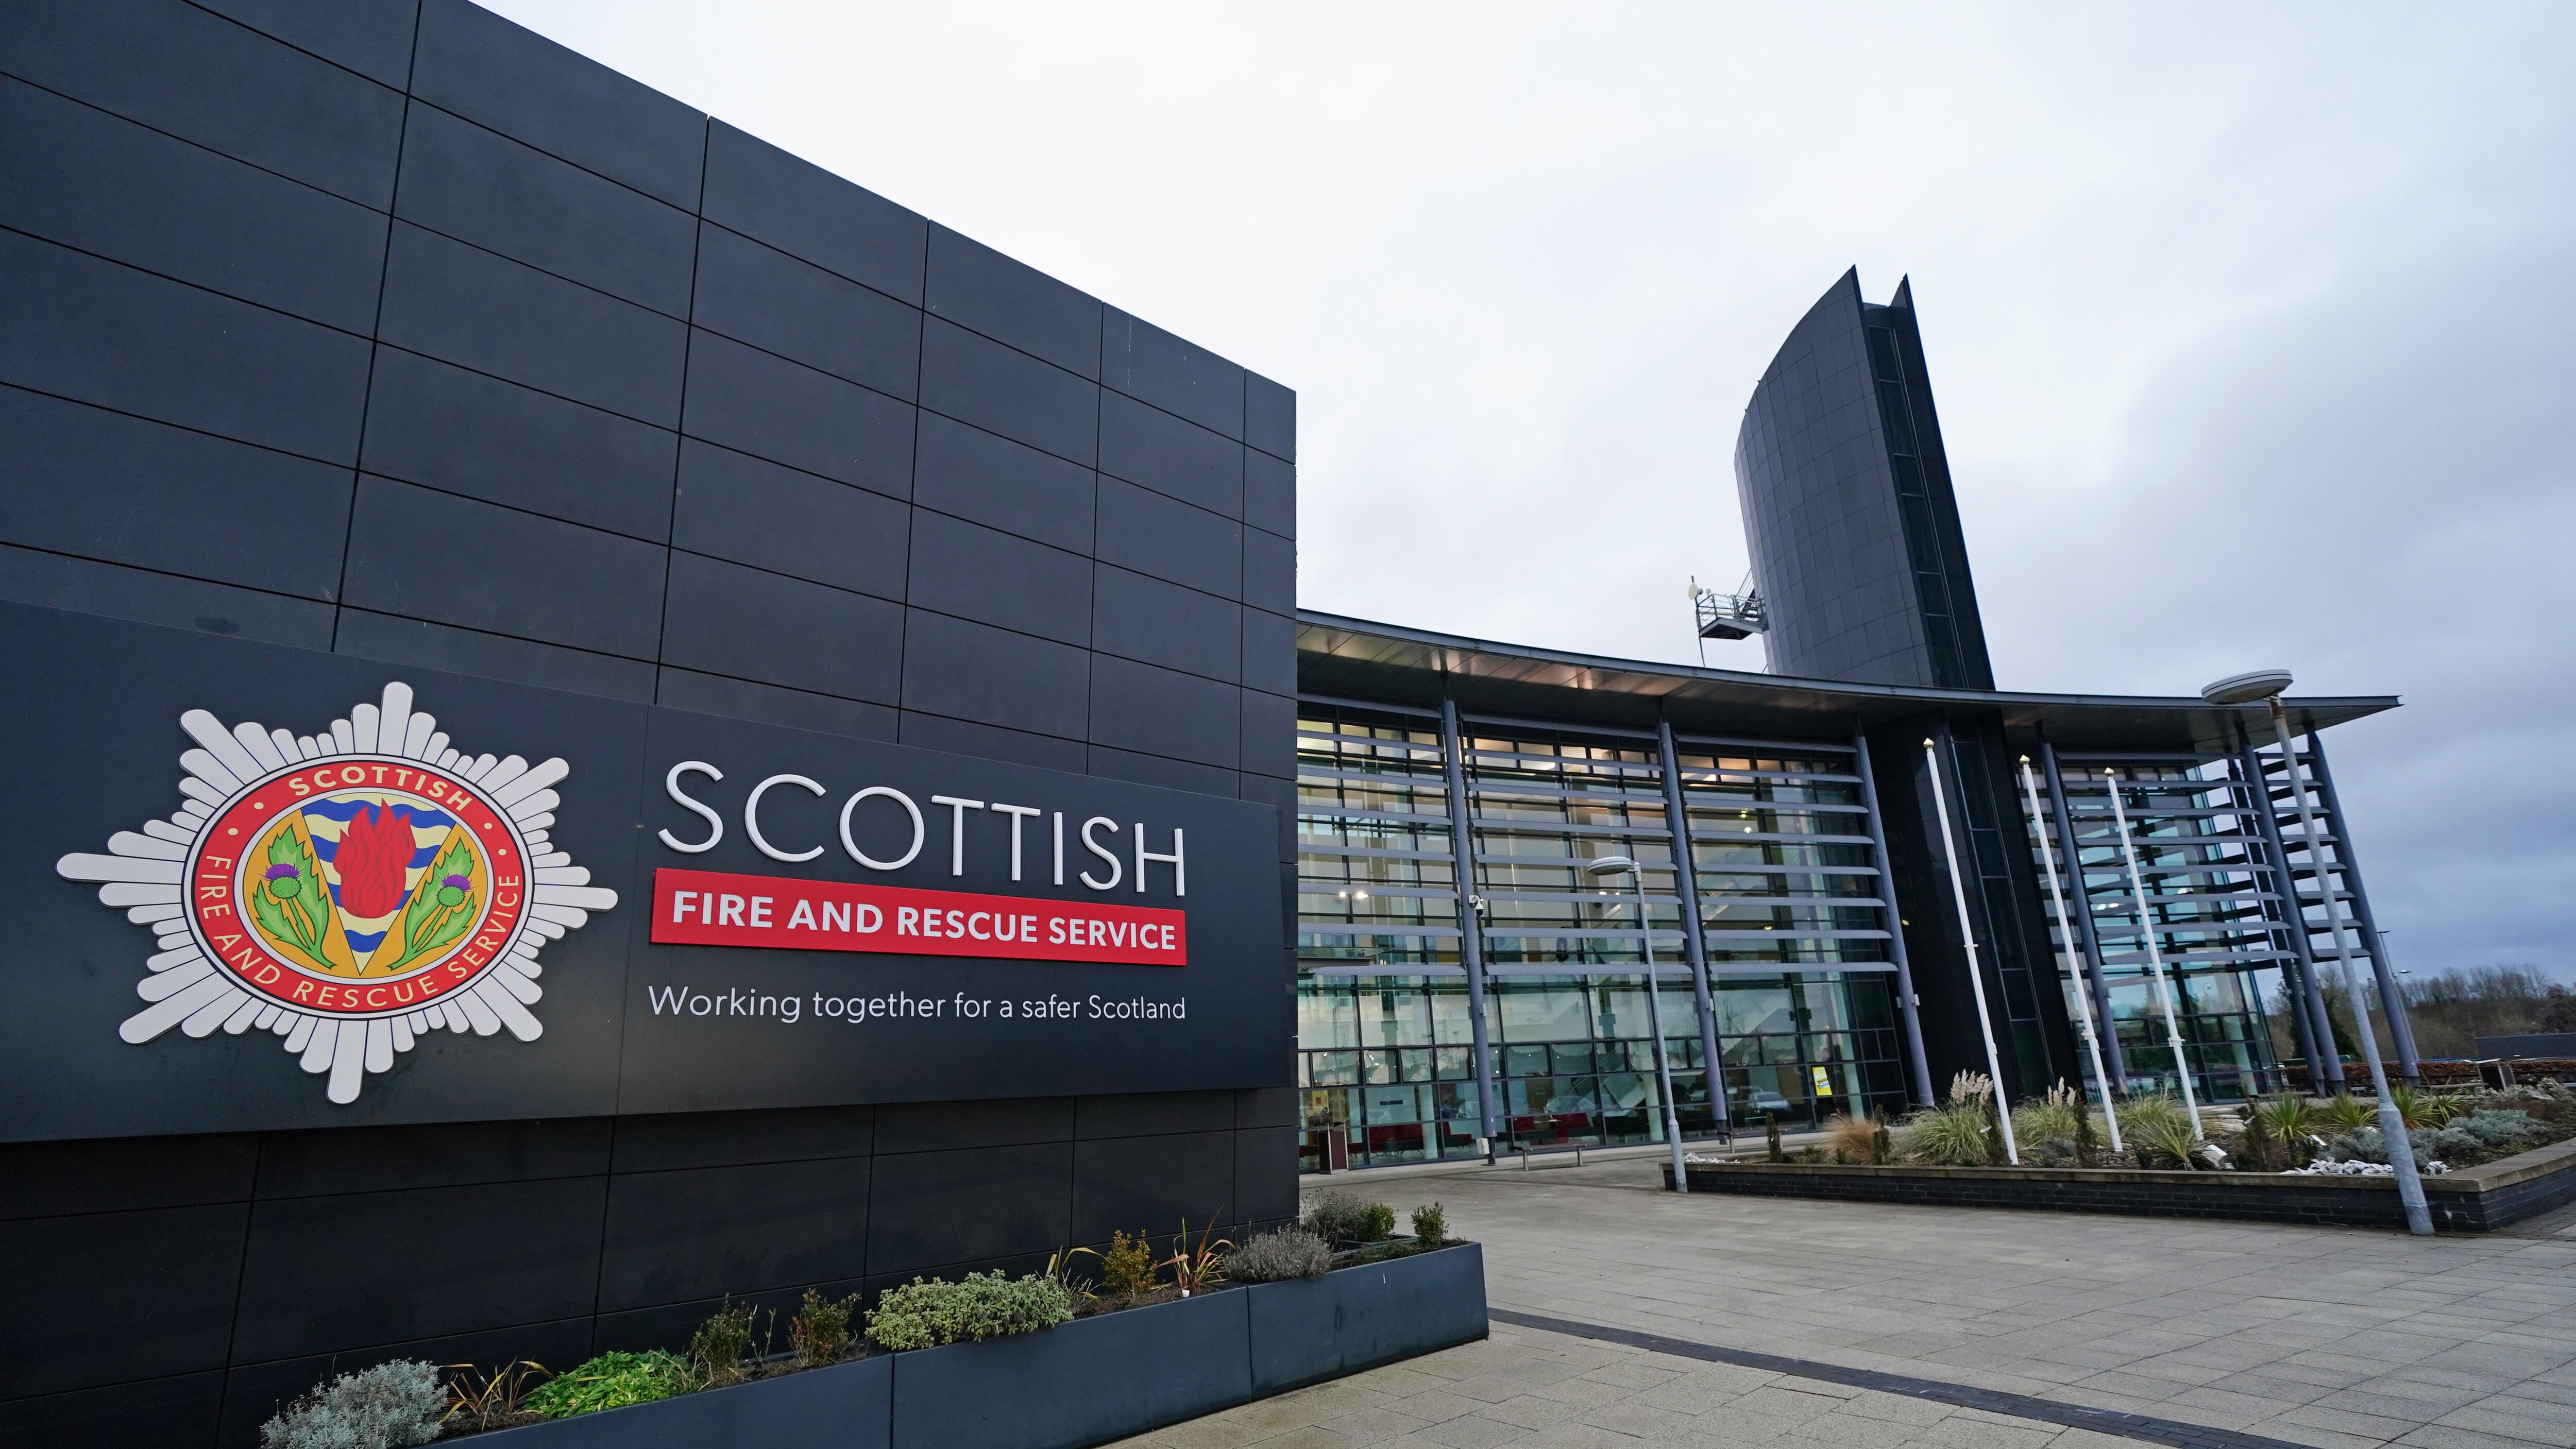 A general view of the Scottish Fire and Rescue Service (SFRS) headquarters in Cambuslang, Glasgow